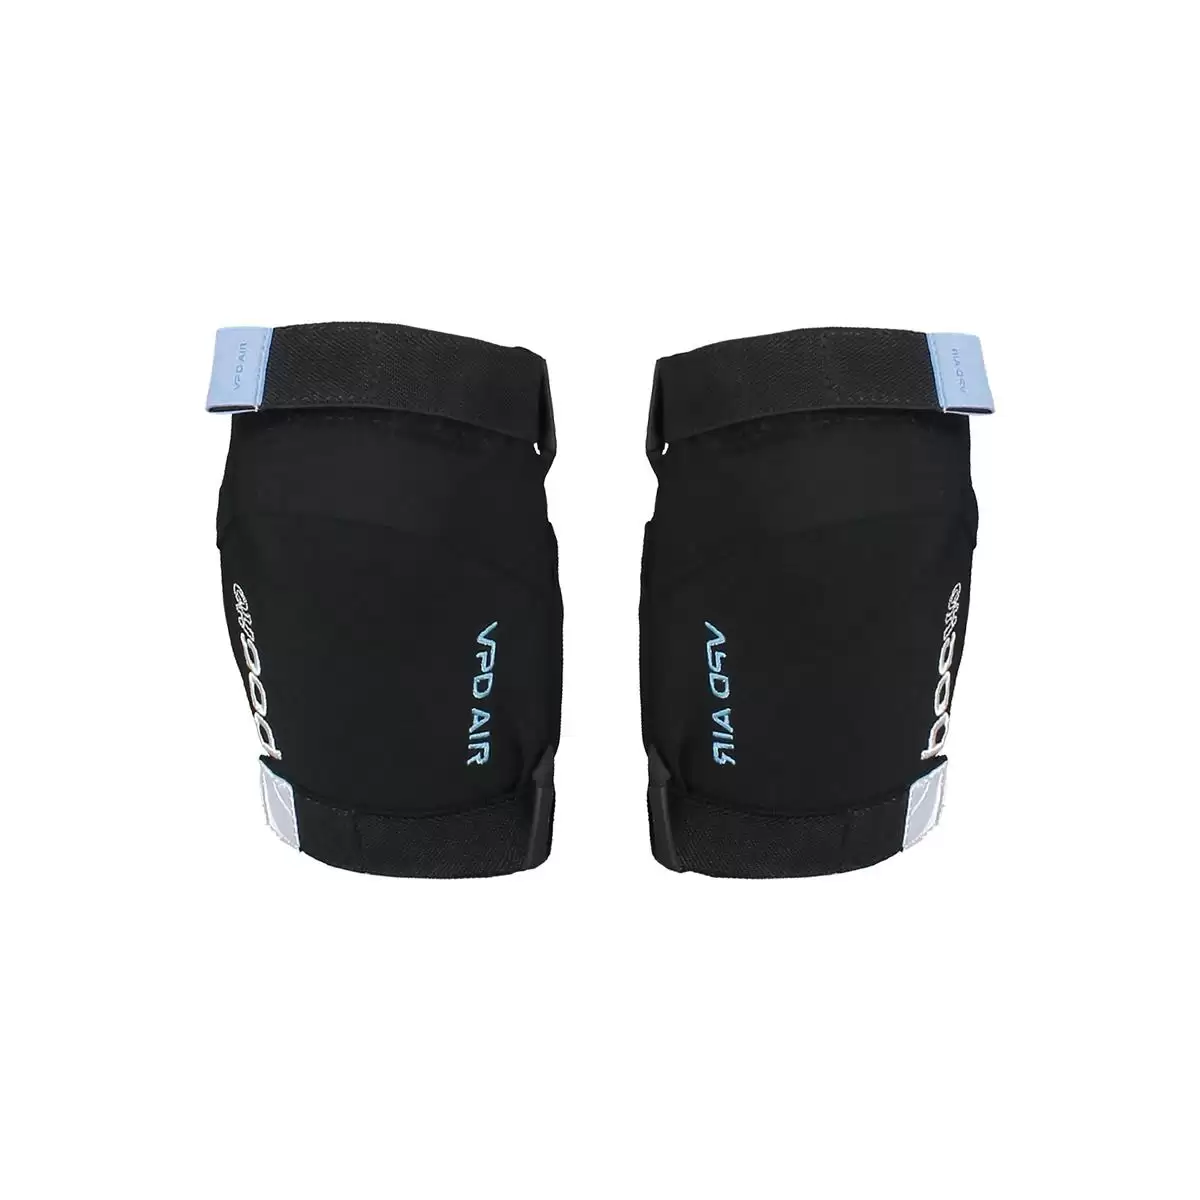 Kid knee / Elbow pads POCito Joint VPD Air Protector Black Size S - image